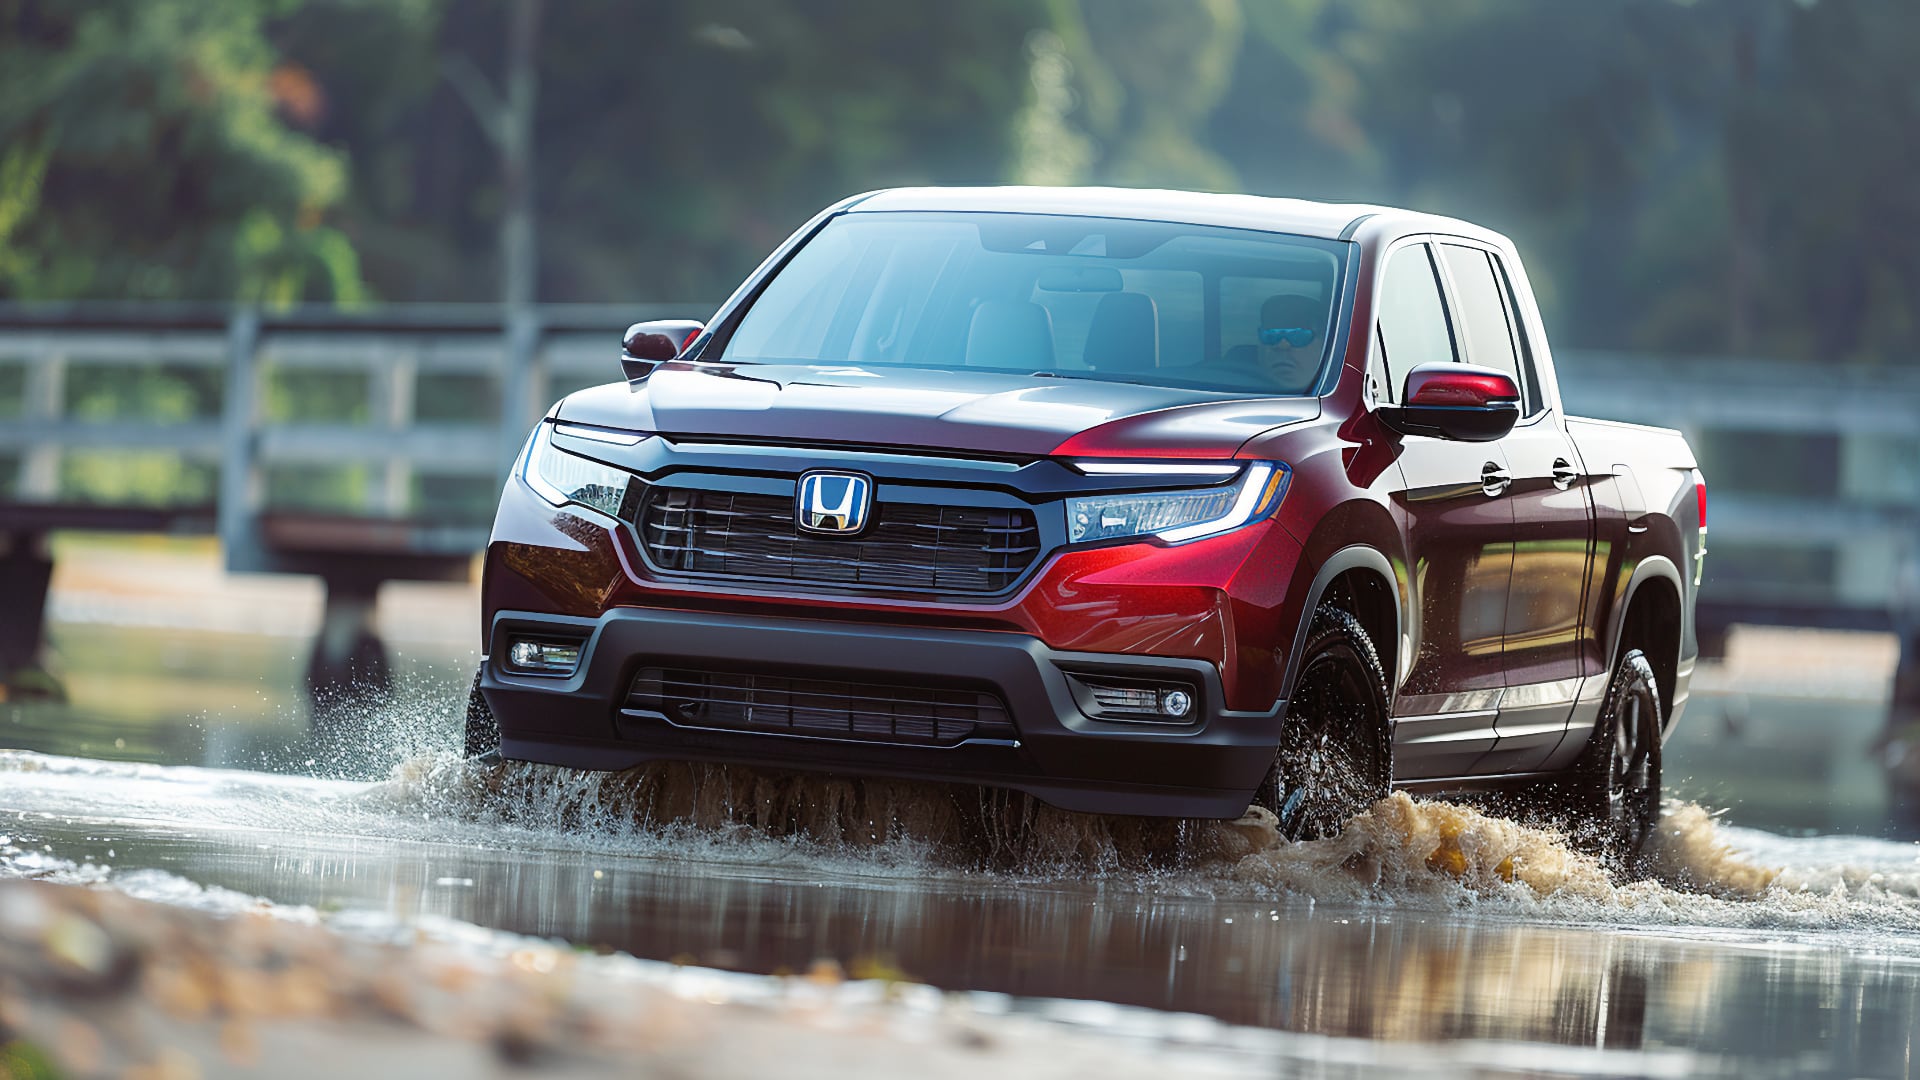 The red 2019 Honda Ridgeline is cautiously driving through water.